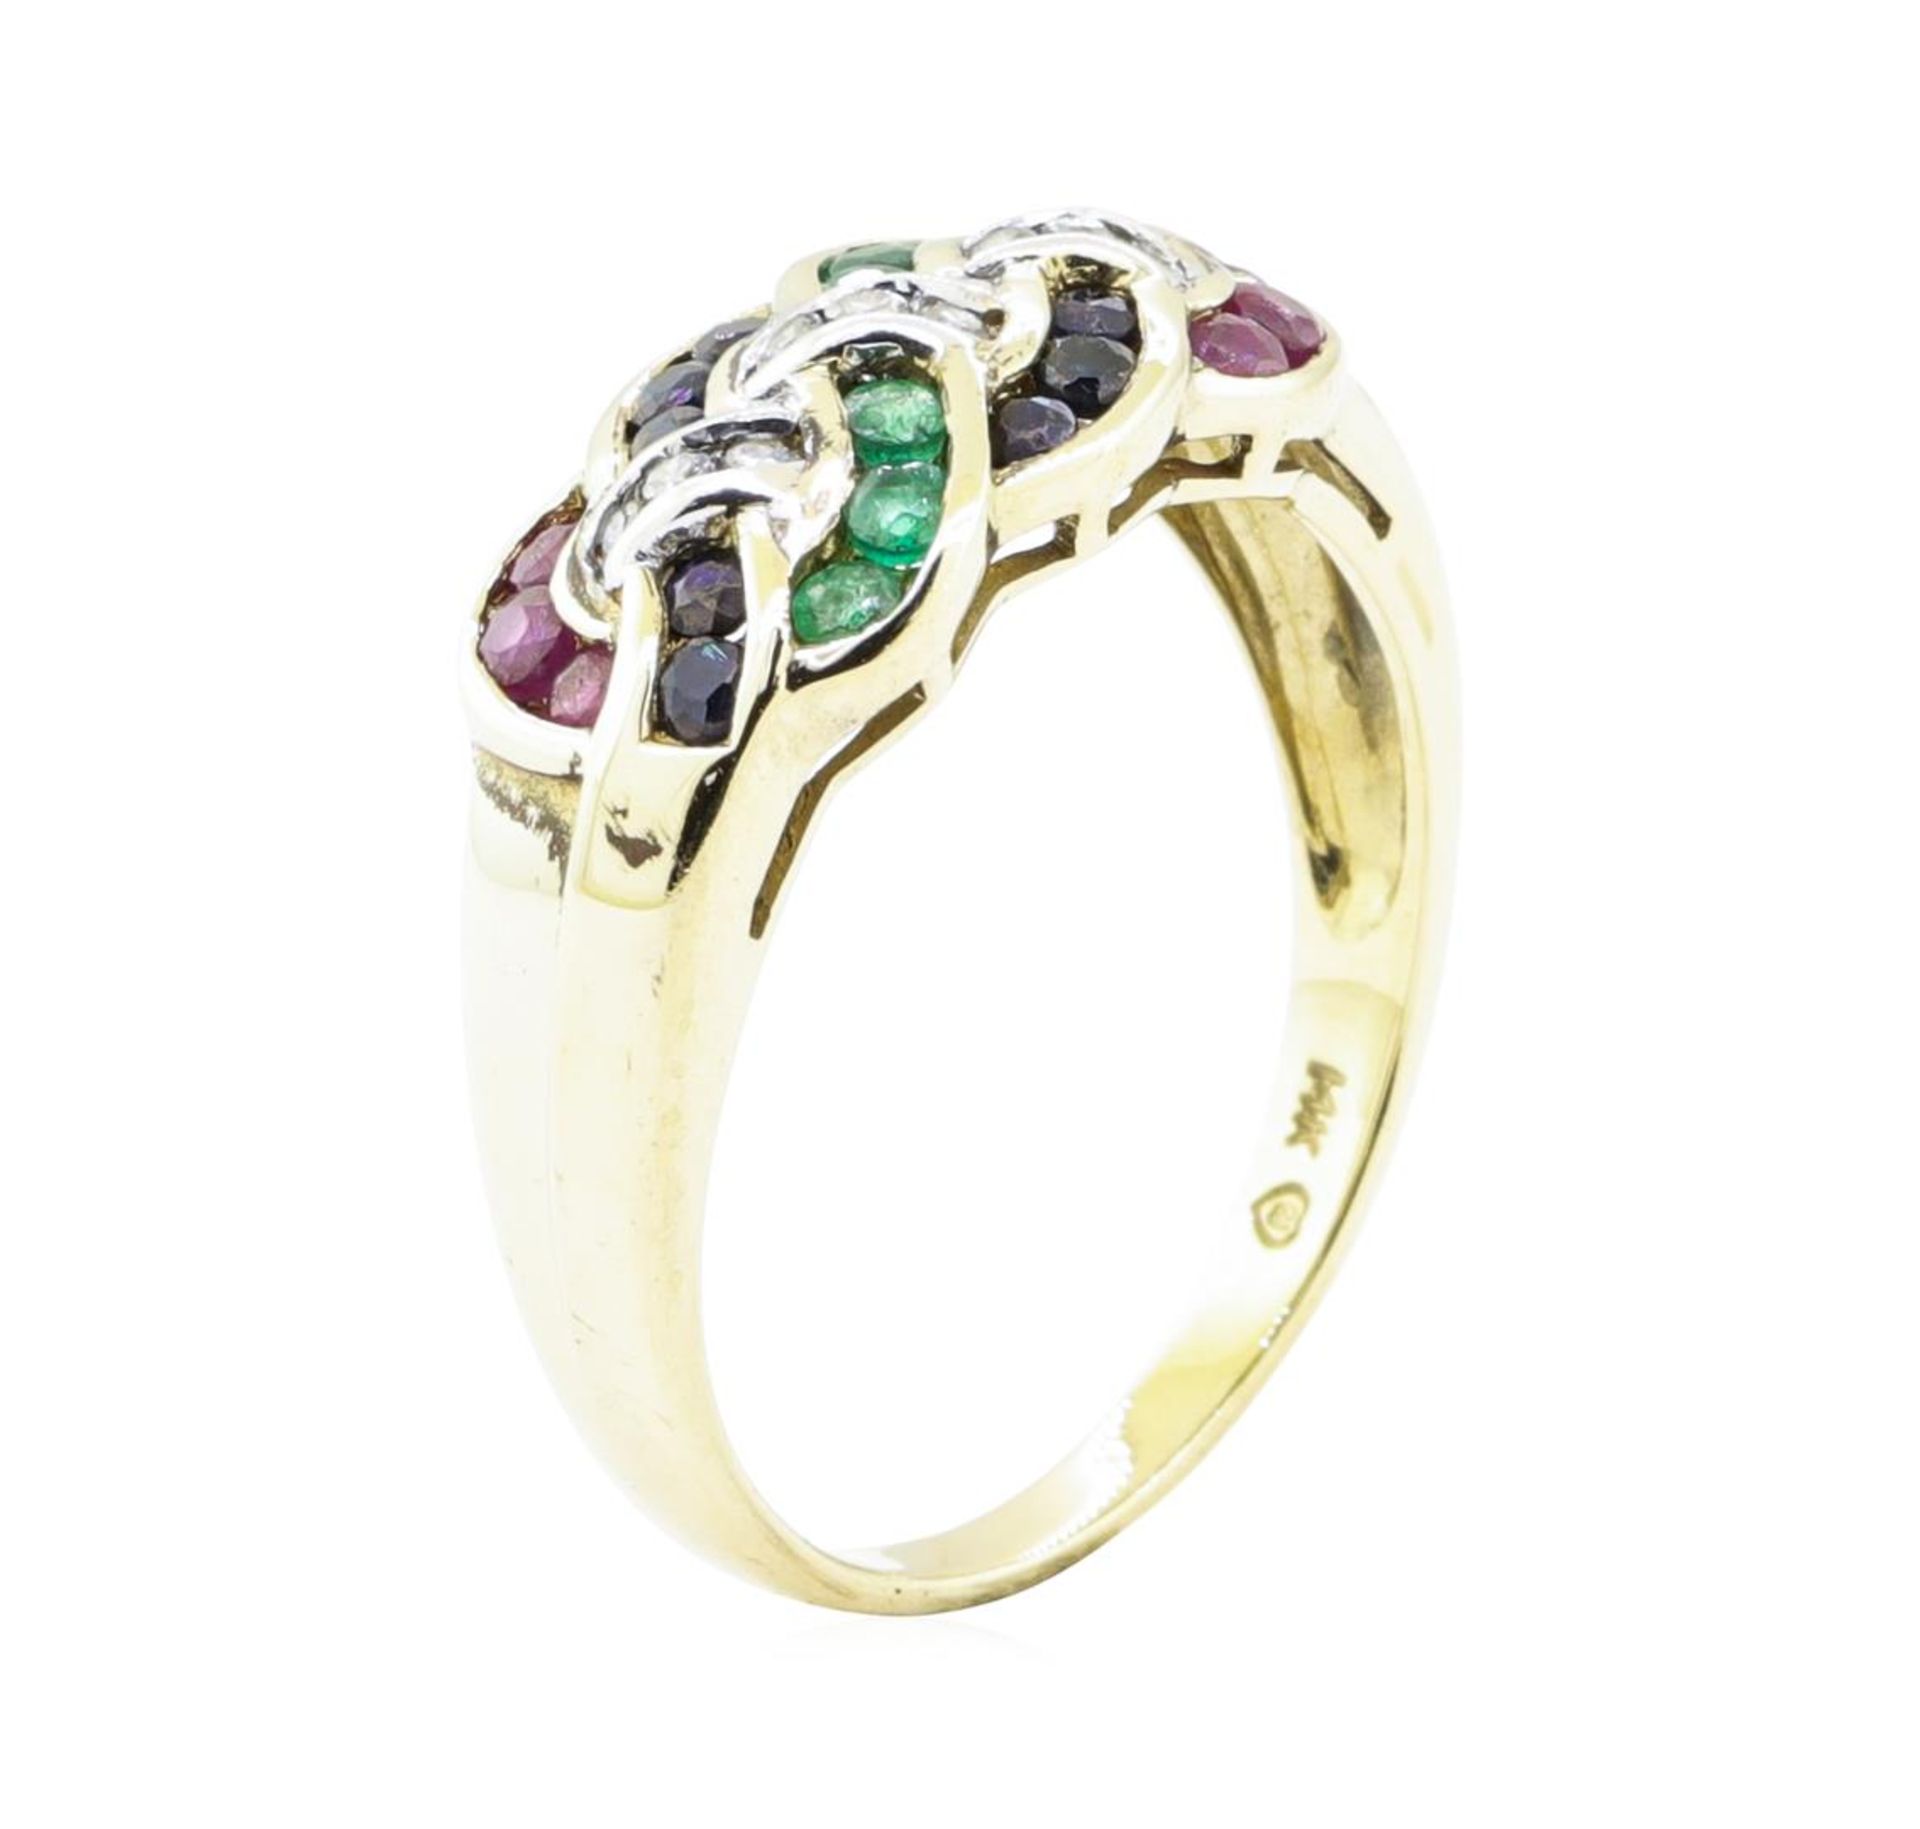 1.38 ctw Multi-colored Gemstone Ring - 14KT Yellow Gold - Image 4 of 6